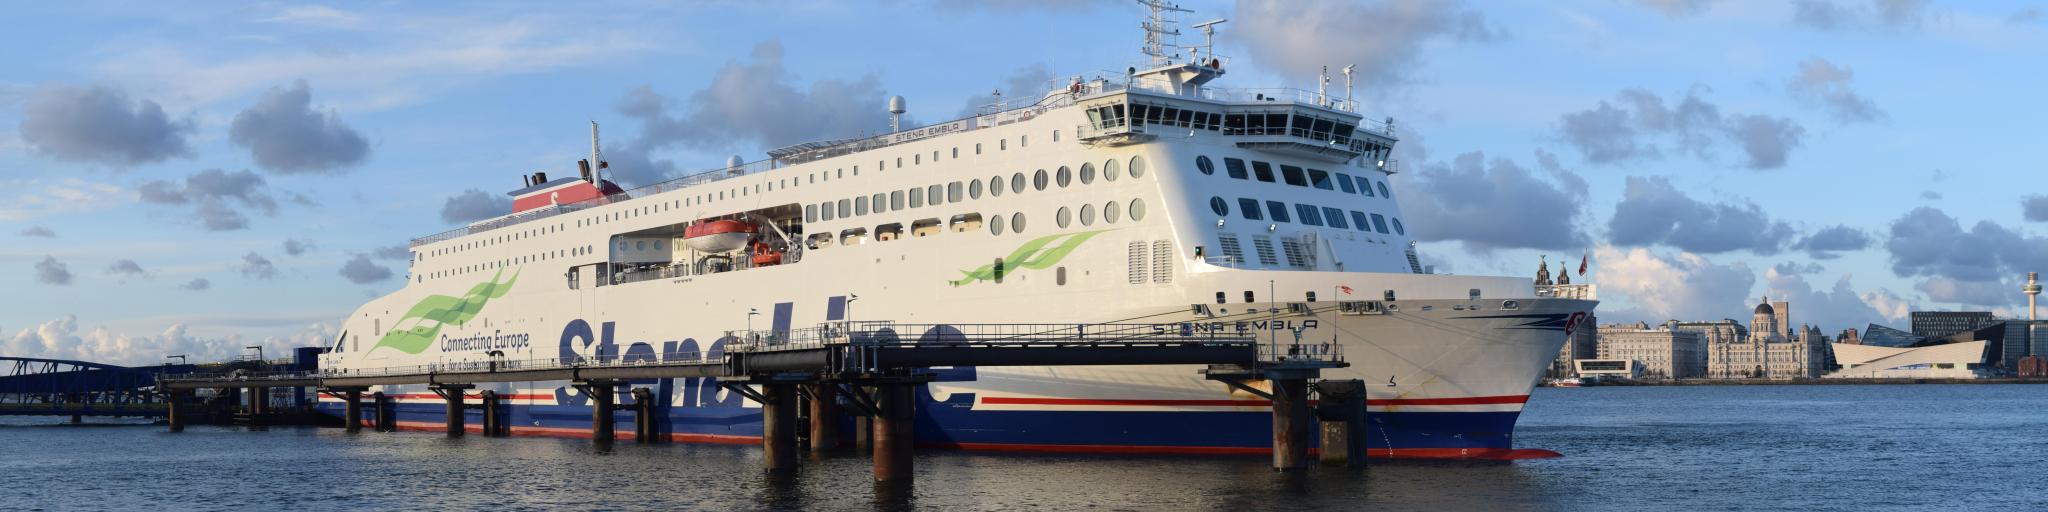 Stena Line ferry is one of the main crossing options for driving to Ireland from the UK.